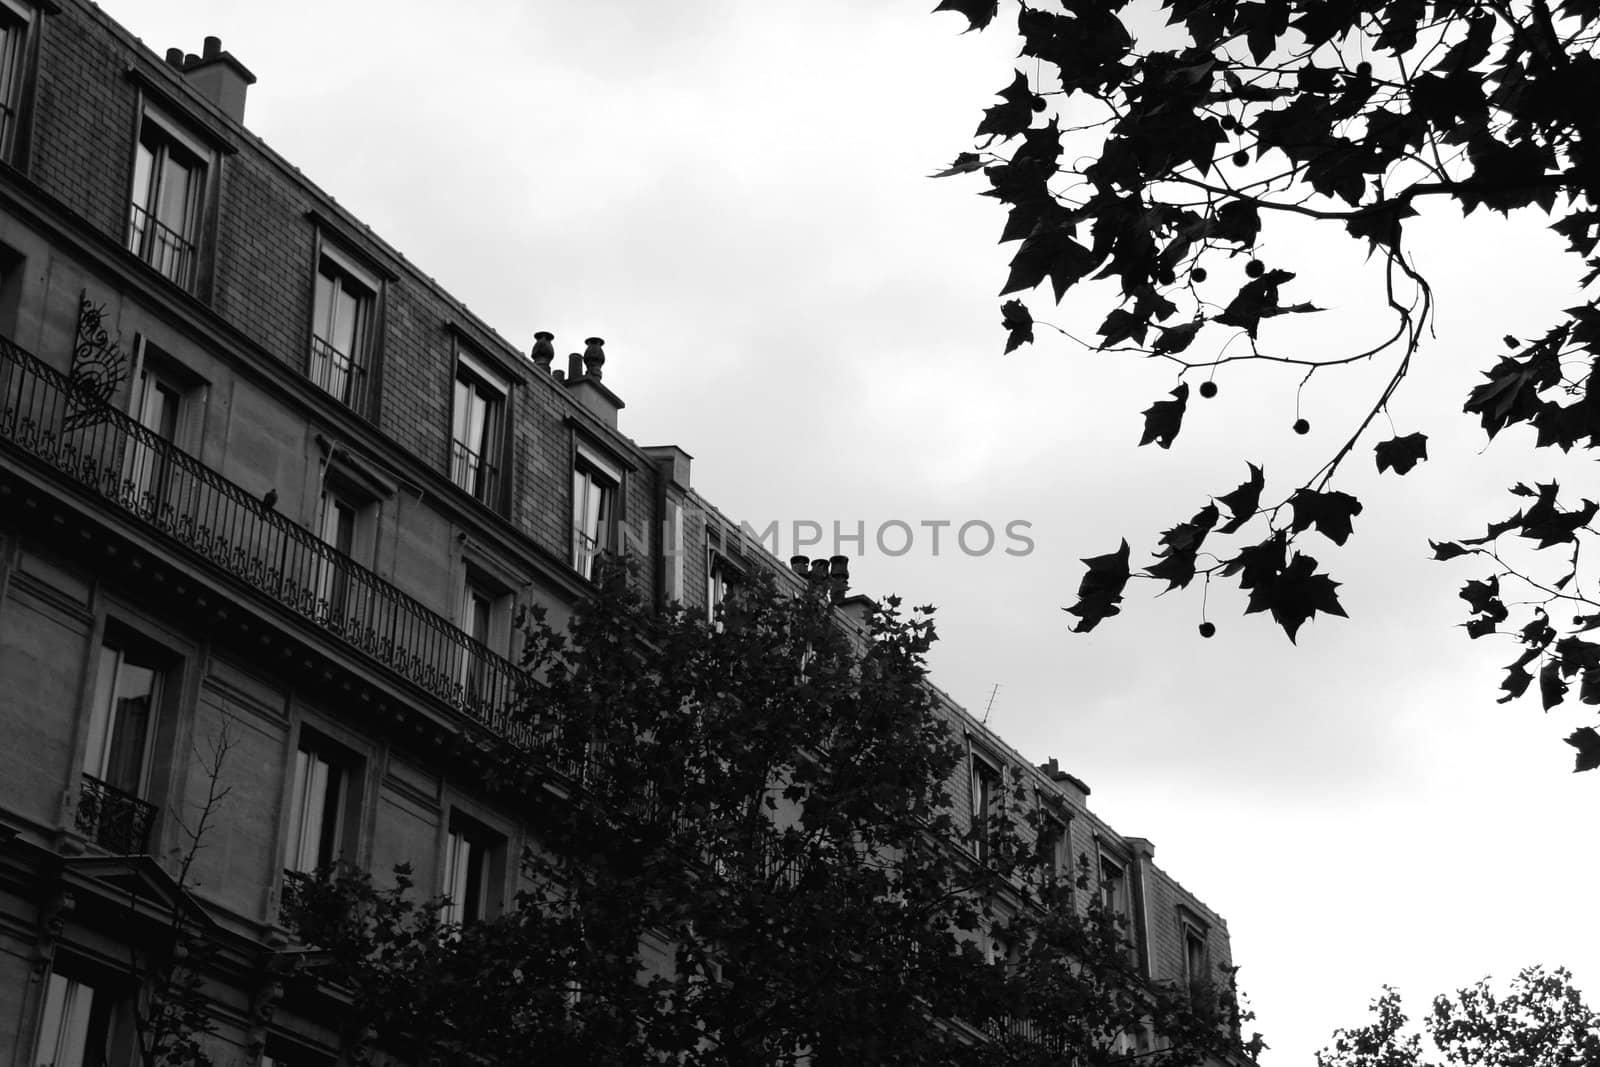 Houses on the streets of the capital of France - Paris. 